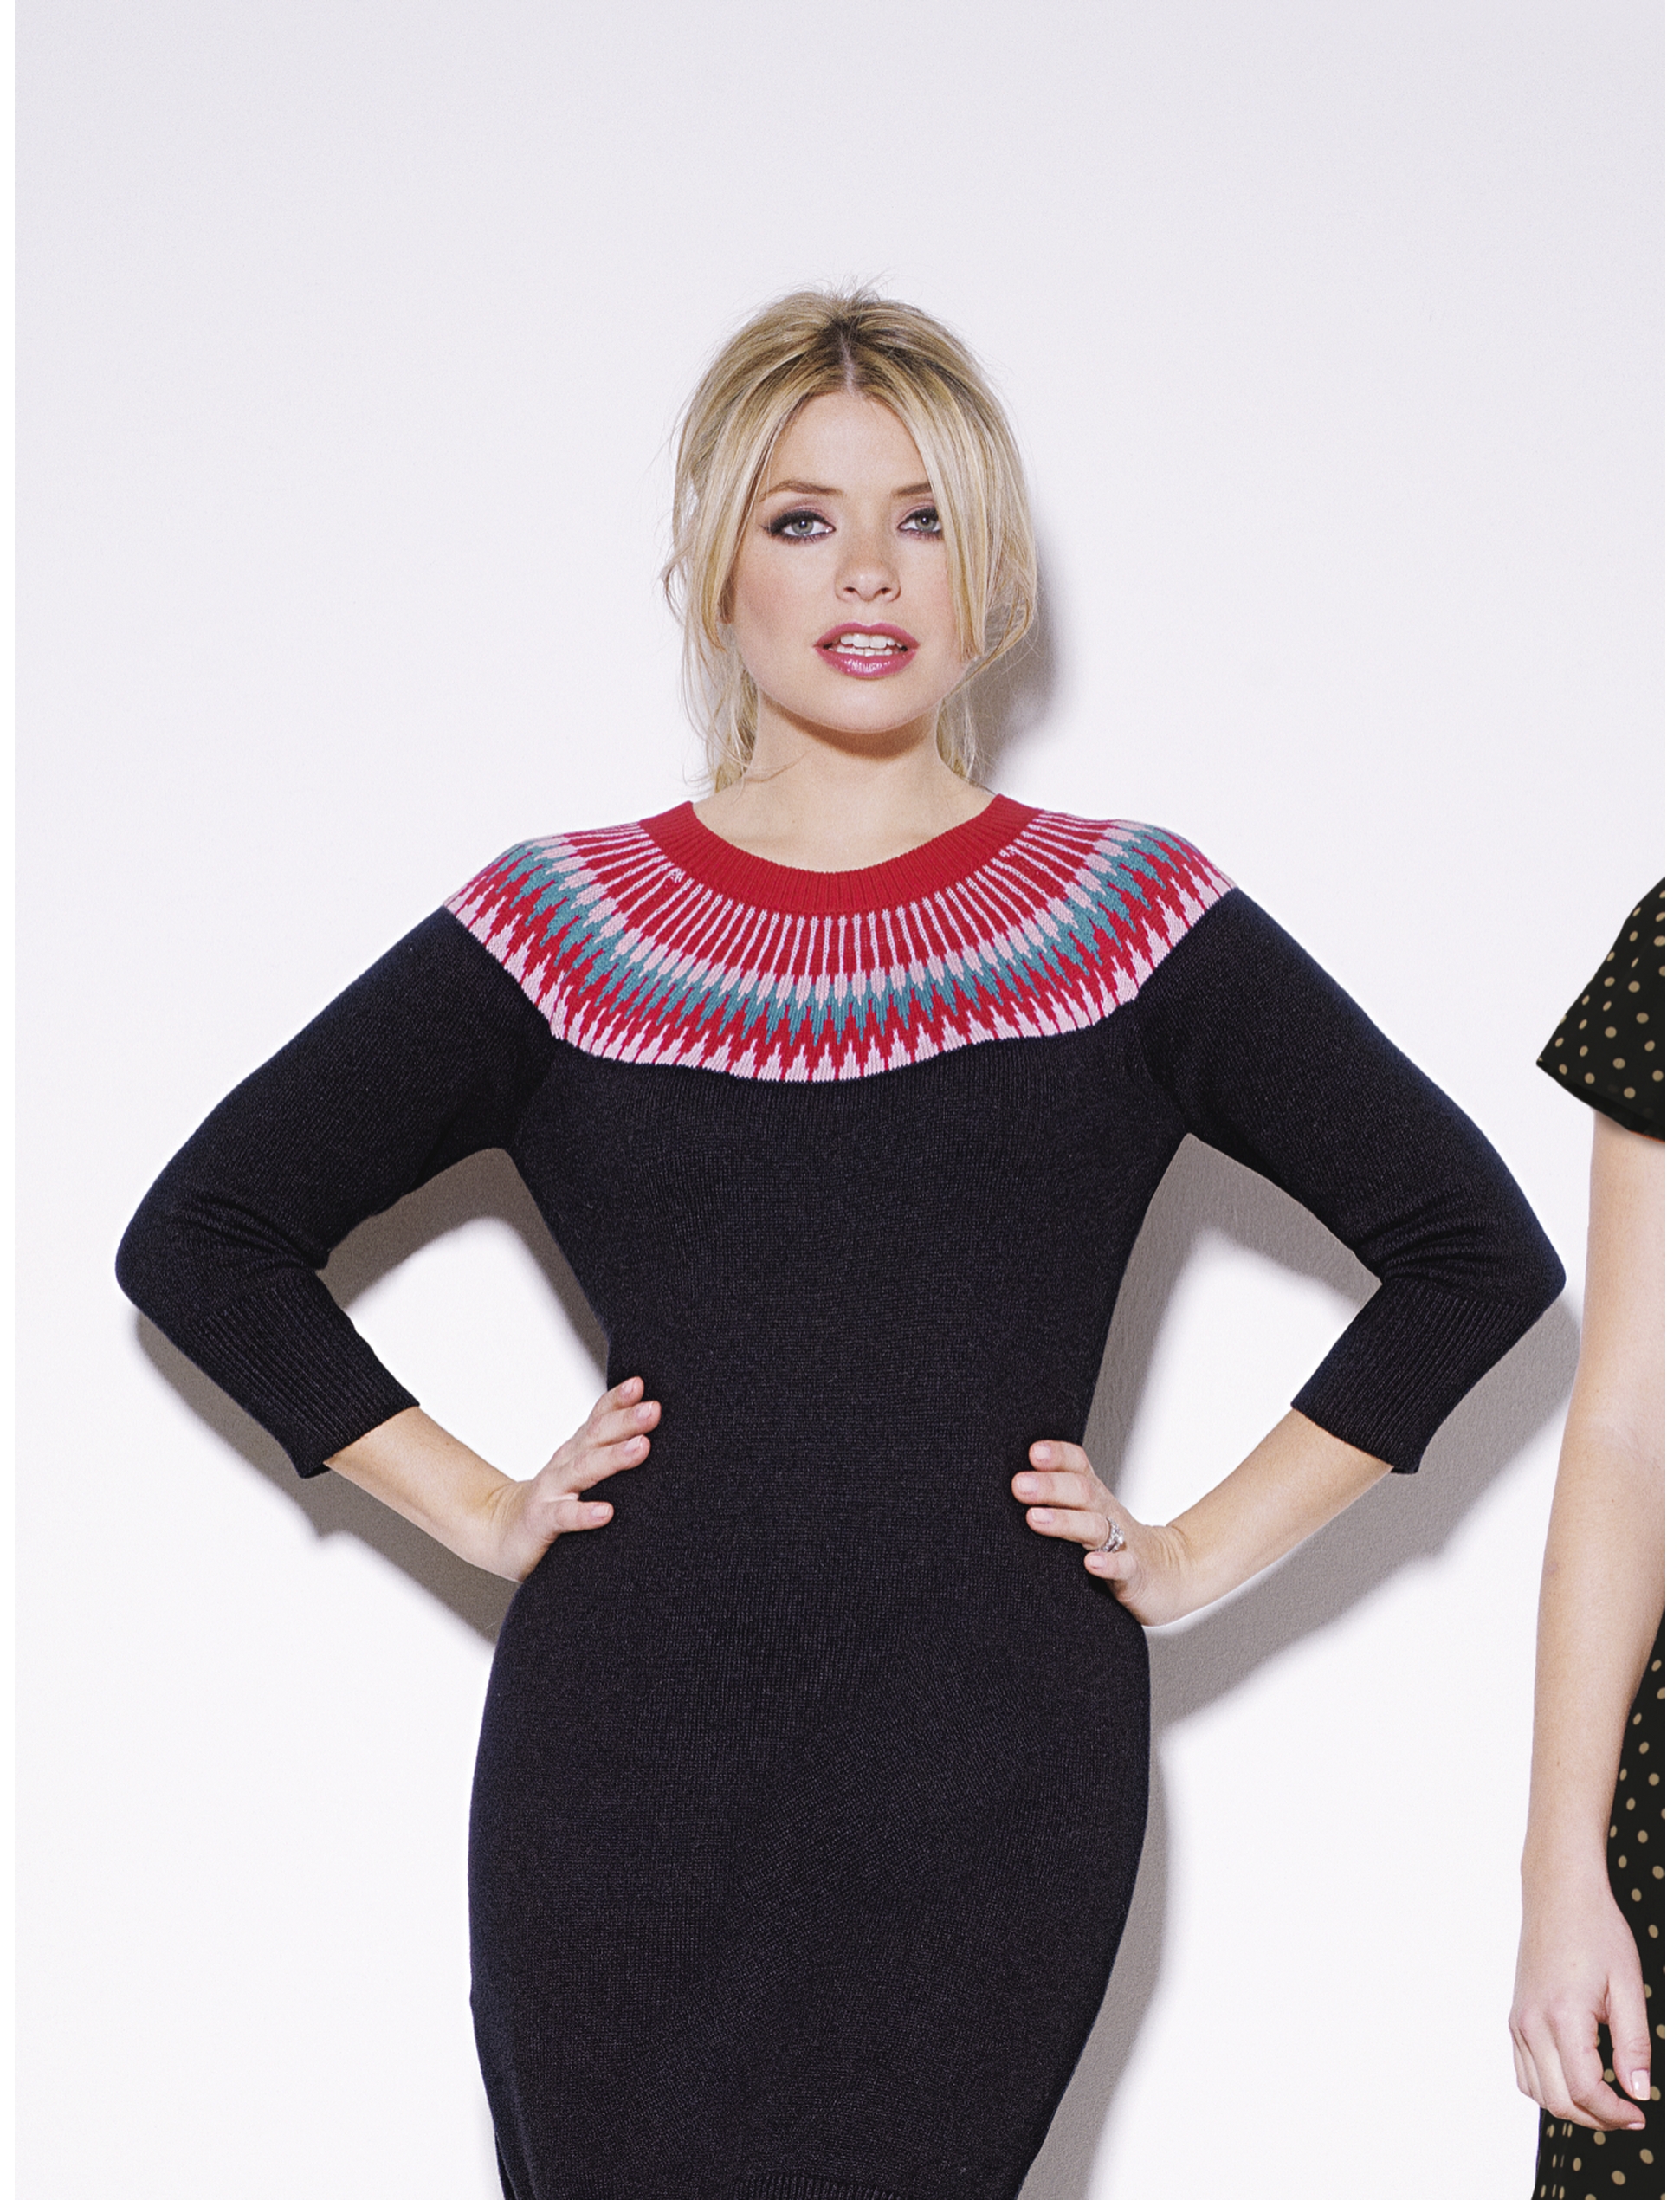 kaneda Holly Willoughby 2012 verycouk 21